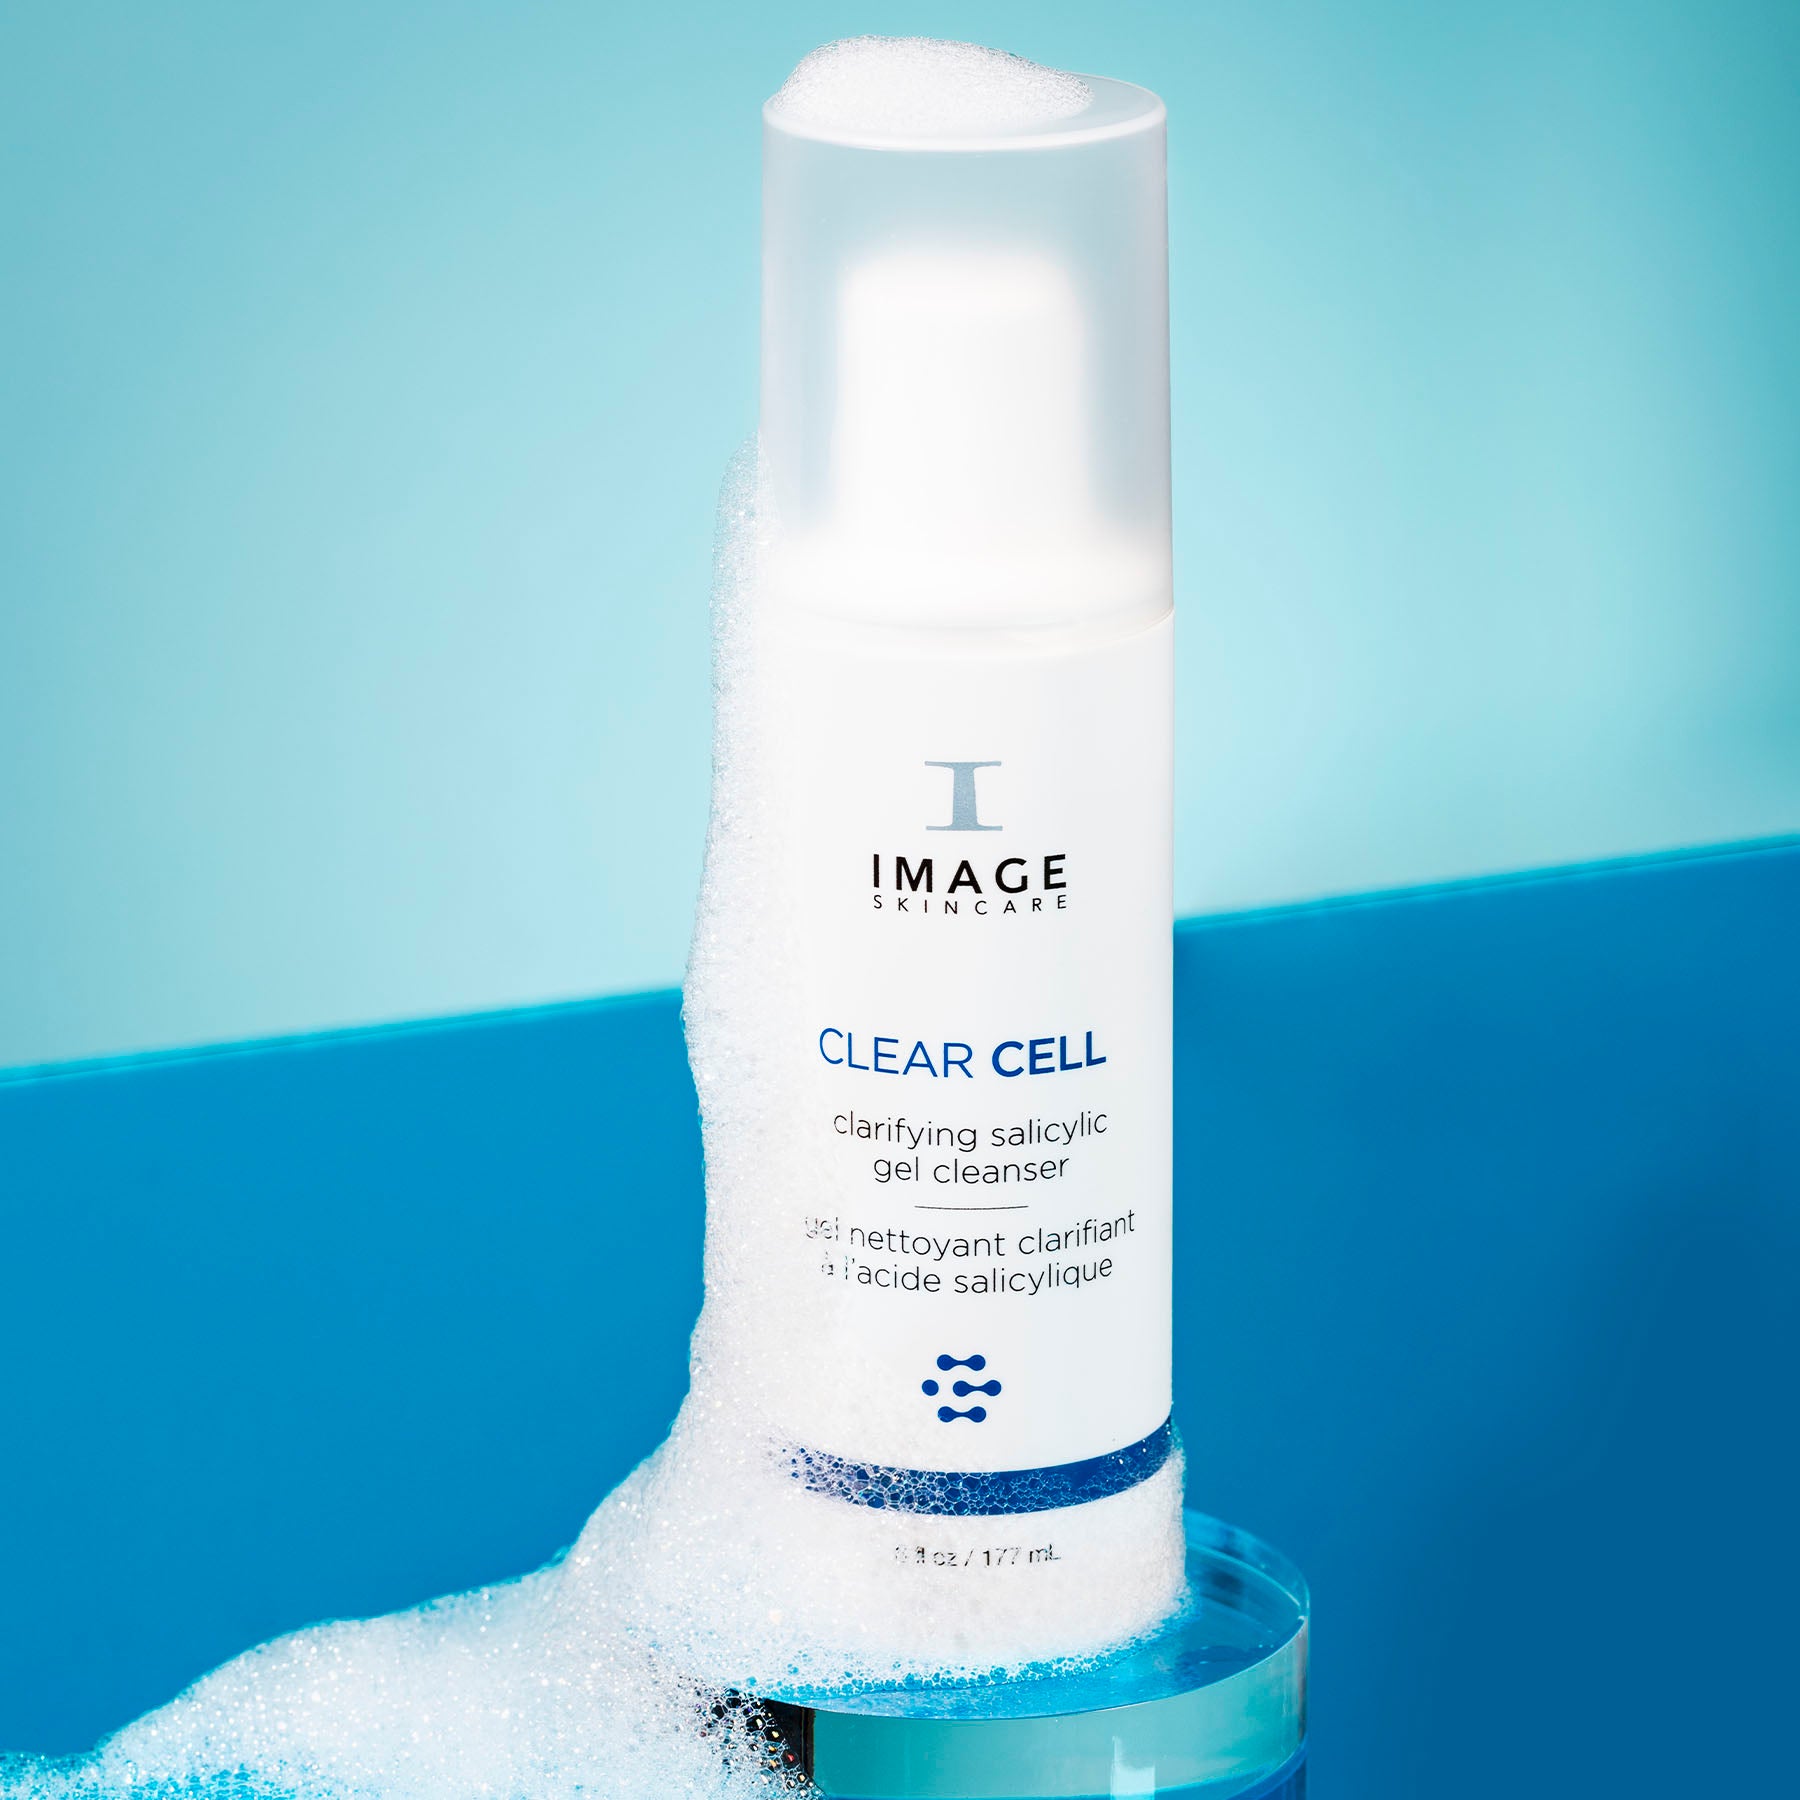 CLEAR CELL salicylic gel cleanser